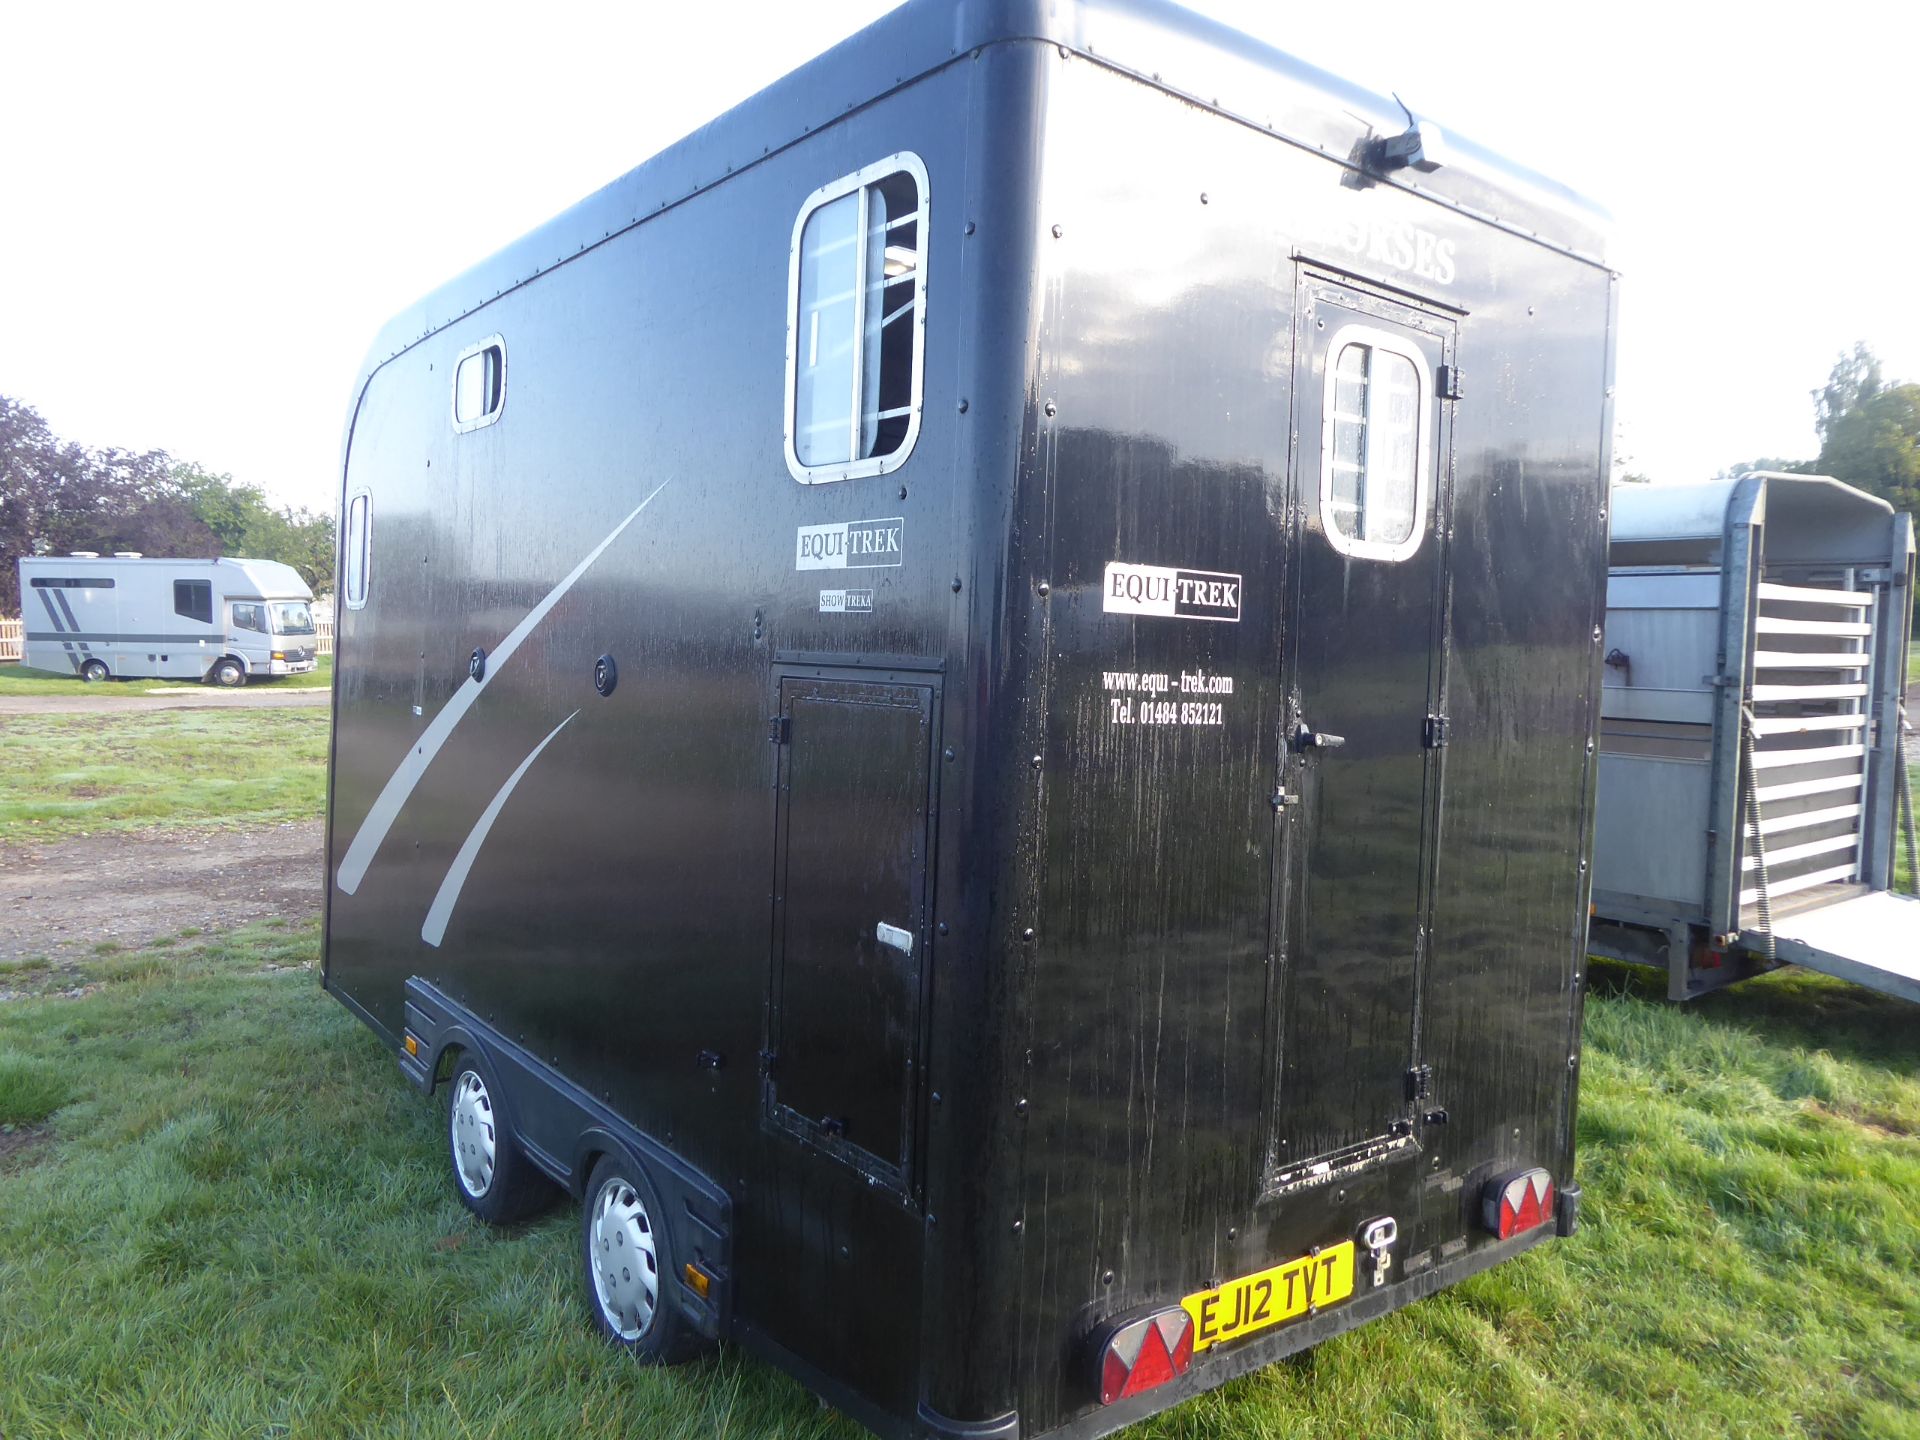 2010 Equitrek Show Trekka L horse trailer, black with silver graphics, carries 2 x 17.2hh, NO VAT - Image 4 of 7